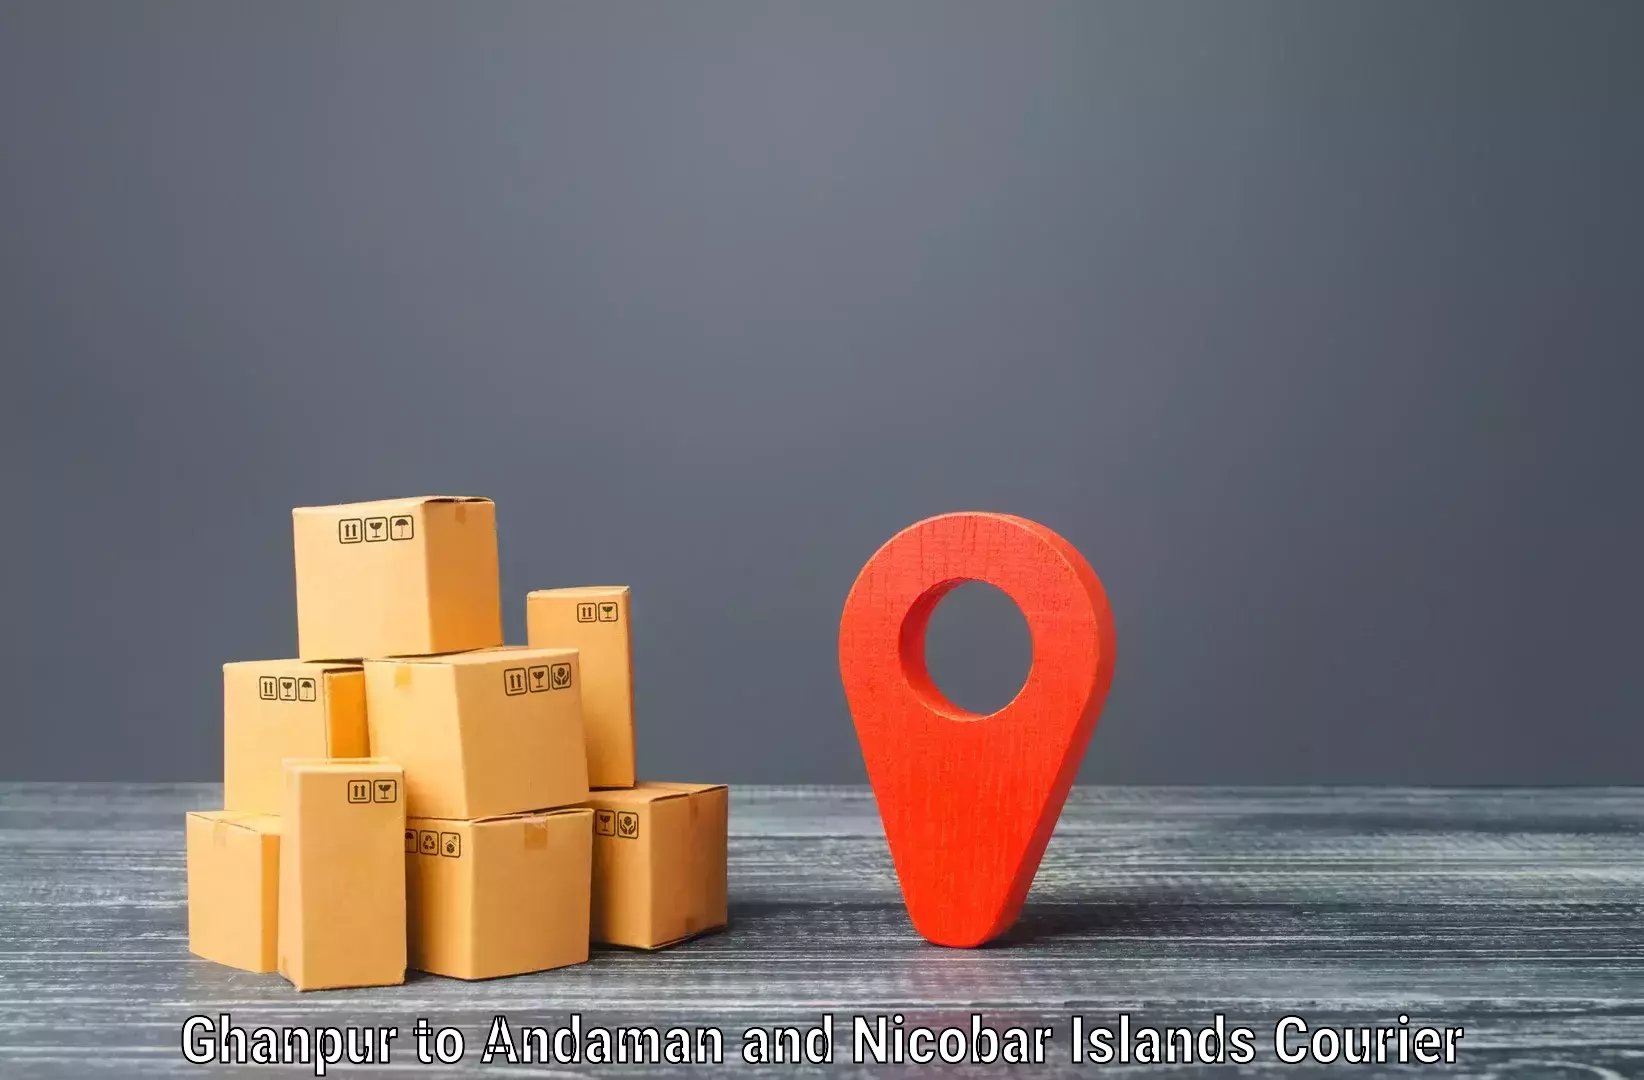 International parcel service Ghanpur to Andaman and Nicobar Islands